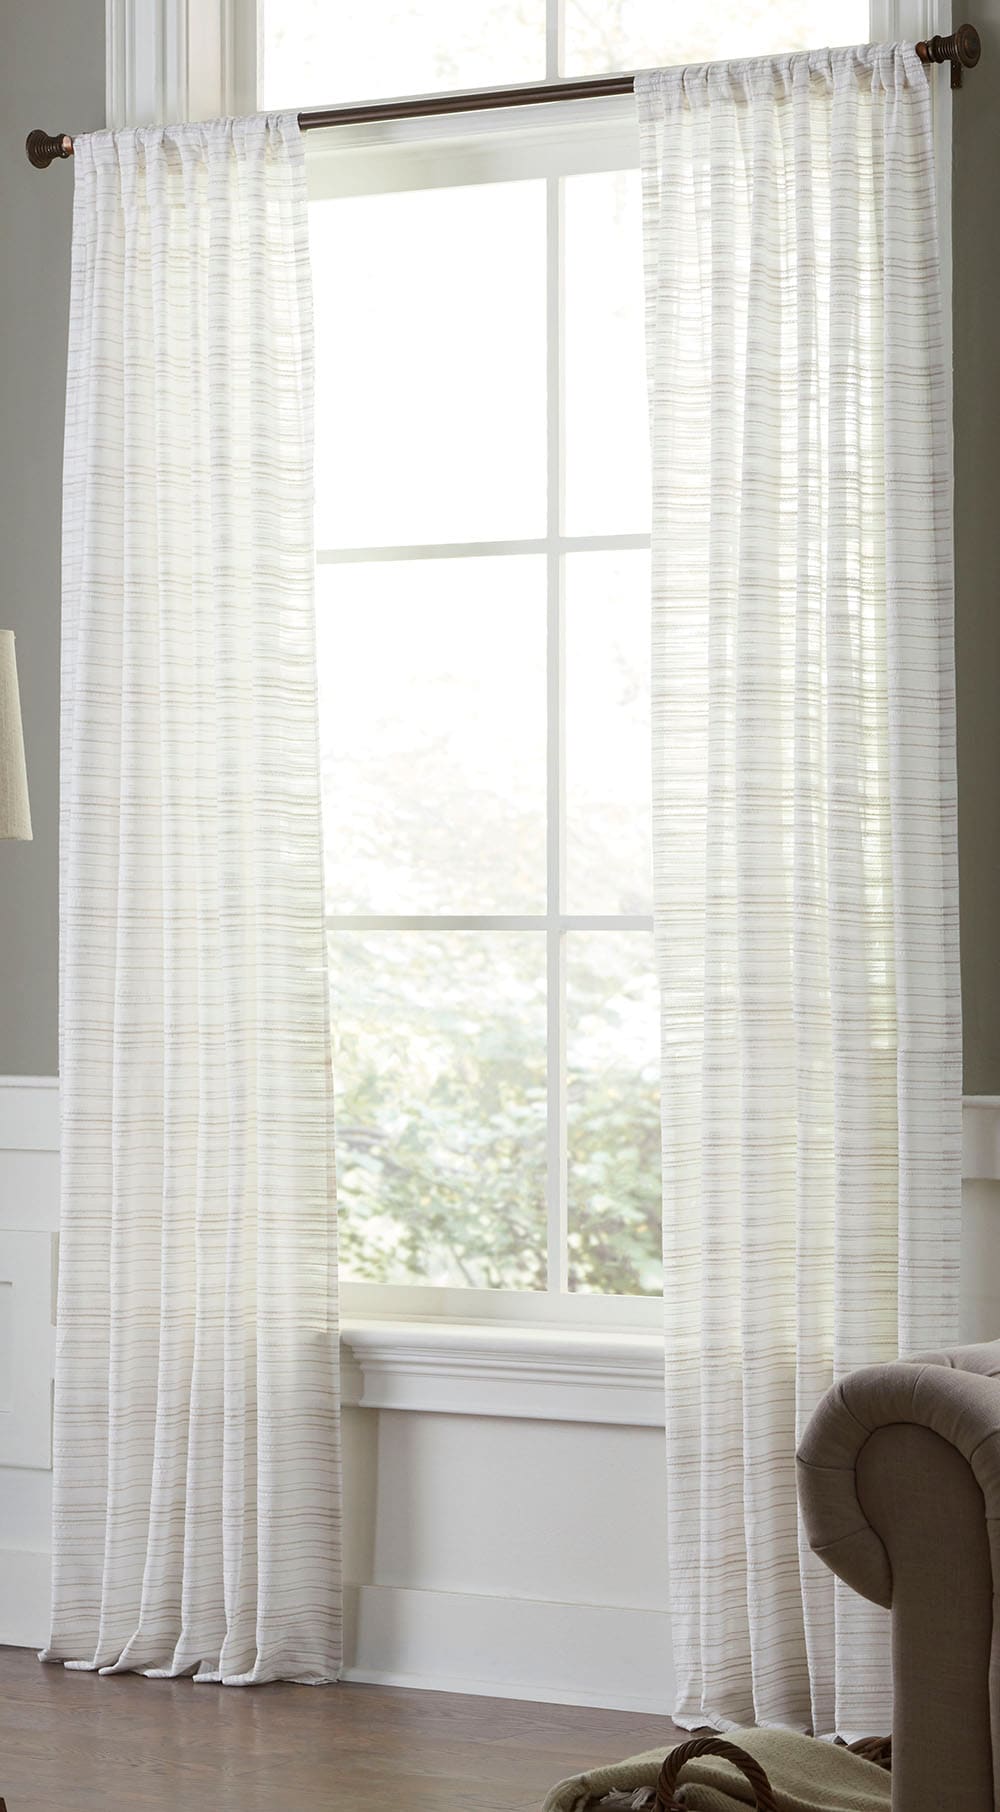 Filtering Drapes allen Pocket roth department 84-in in Panel Curtain Rod at Taupe + the & Light Single Curtains